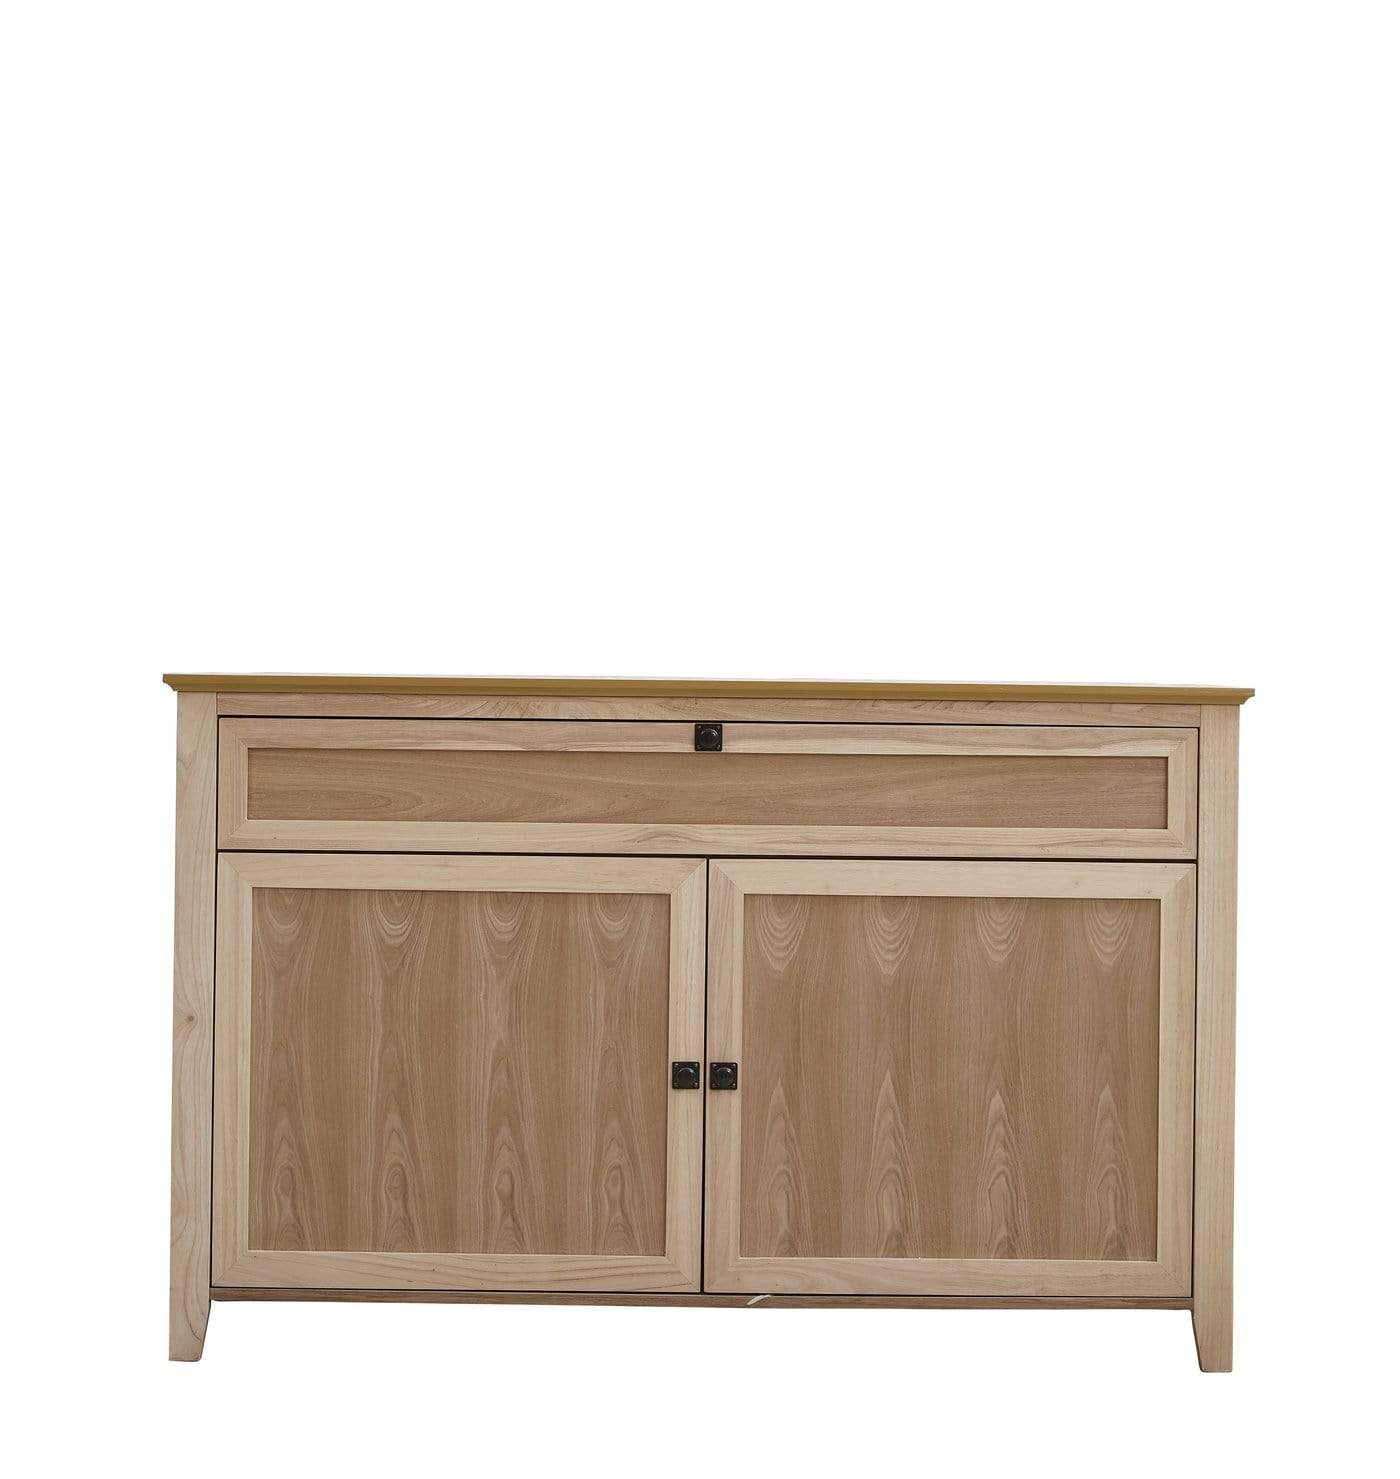 StarWood Fireplaces - Touchstone The Claymont Unfinished TV Lift Cabinet -